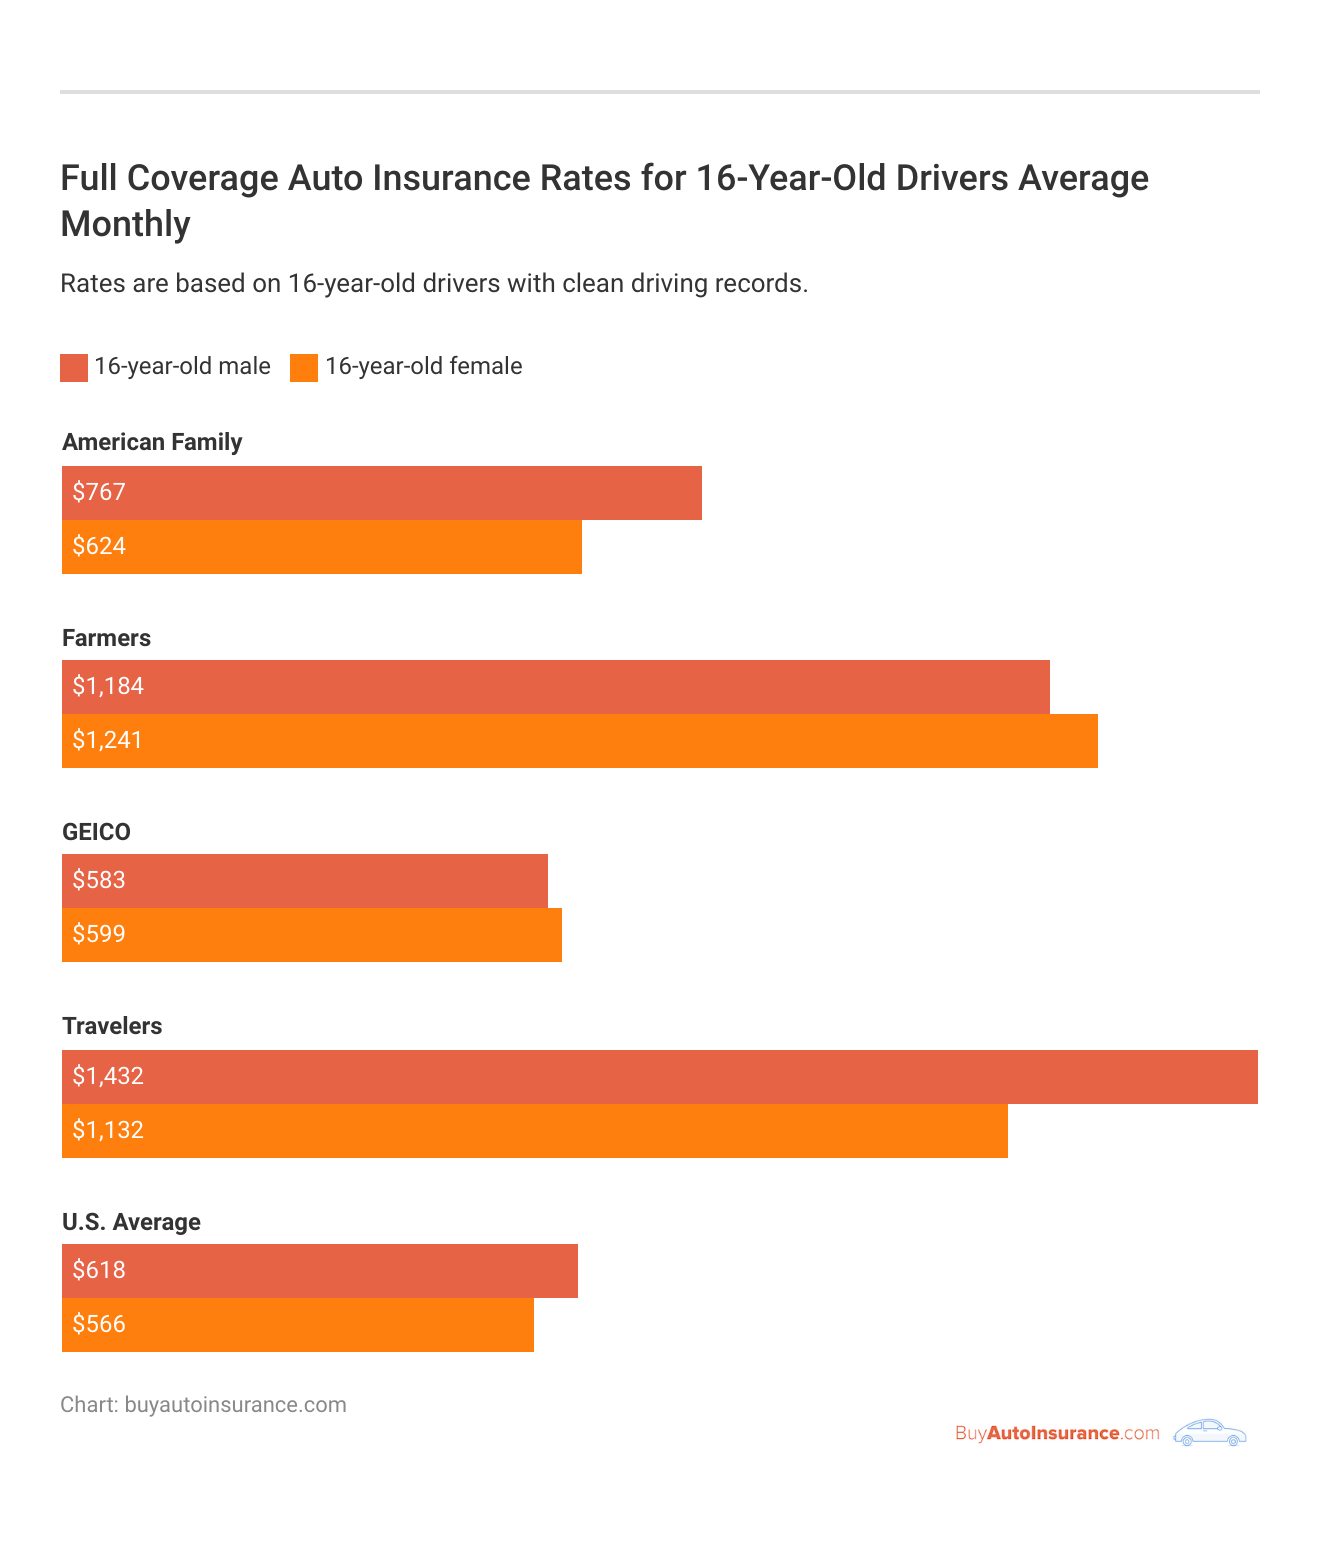 <h3> Full Coverage Auto Insurance Rates for 16-Year-Old Drivers Average Monthly</h3>